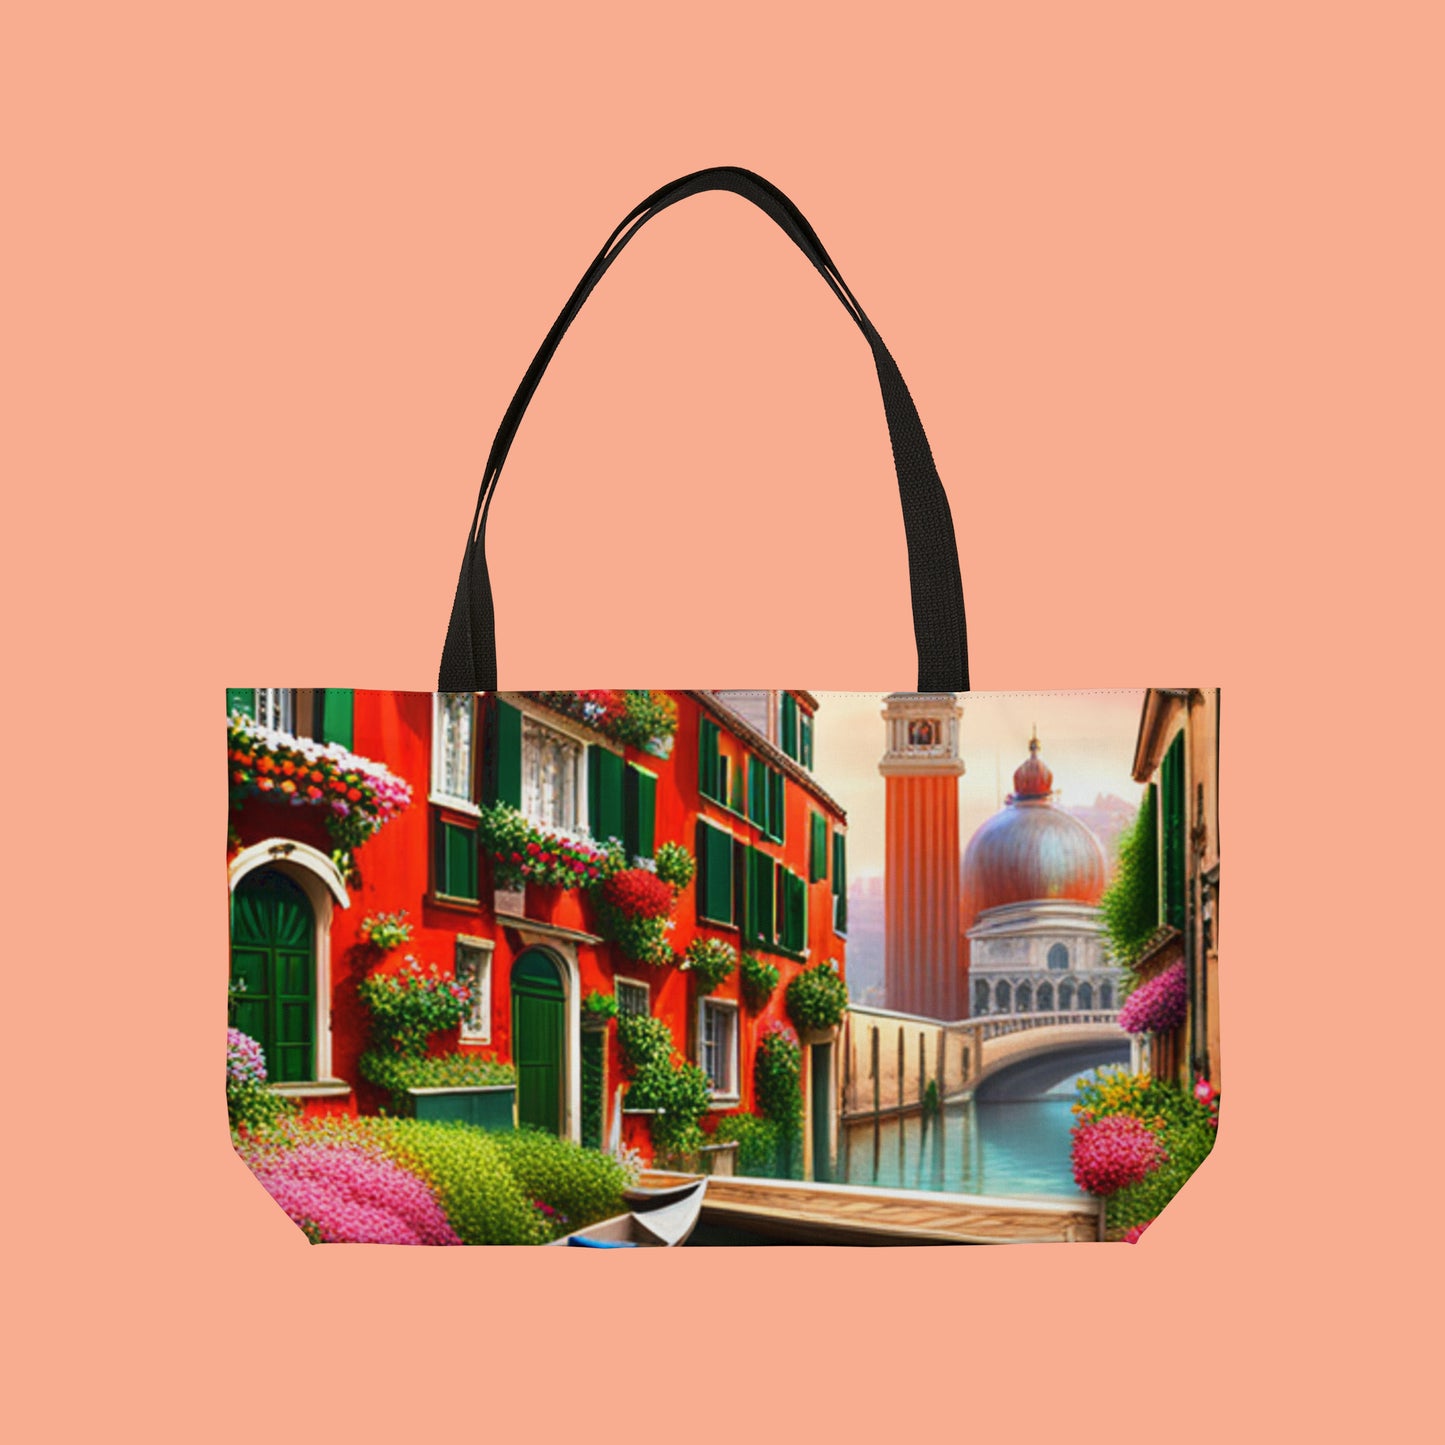 A design inspired by the very photogenic city of Venice, Italy on this Weekender Tote Bag.